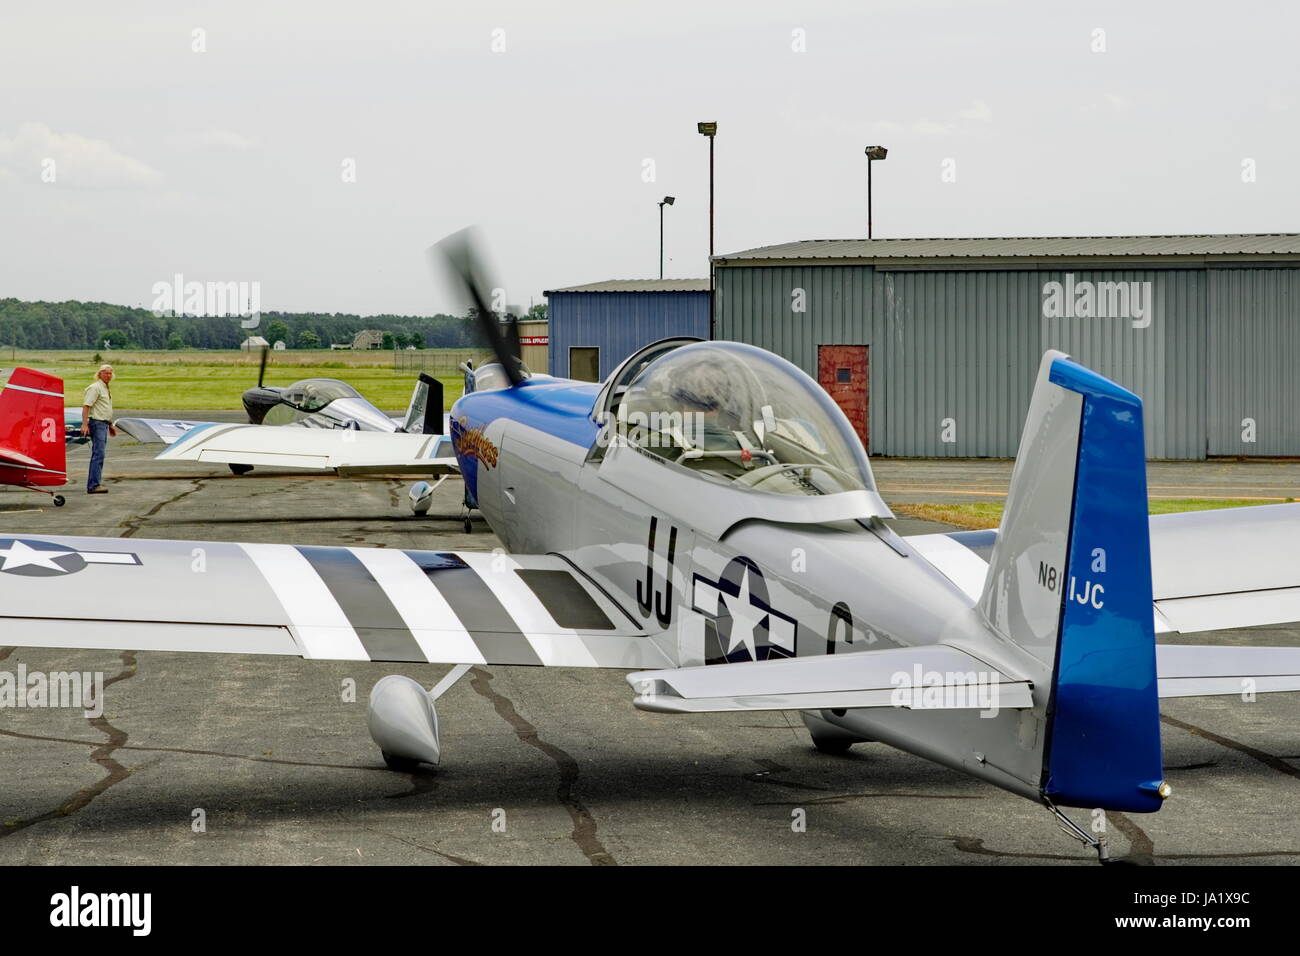 Kit Plane High Resolution Stock Photography and Images - Alamy